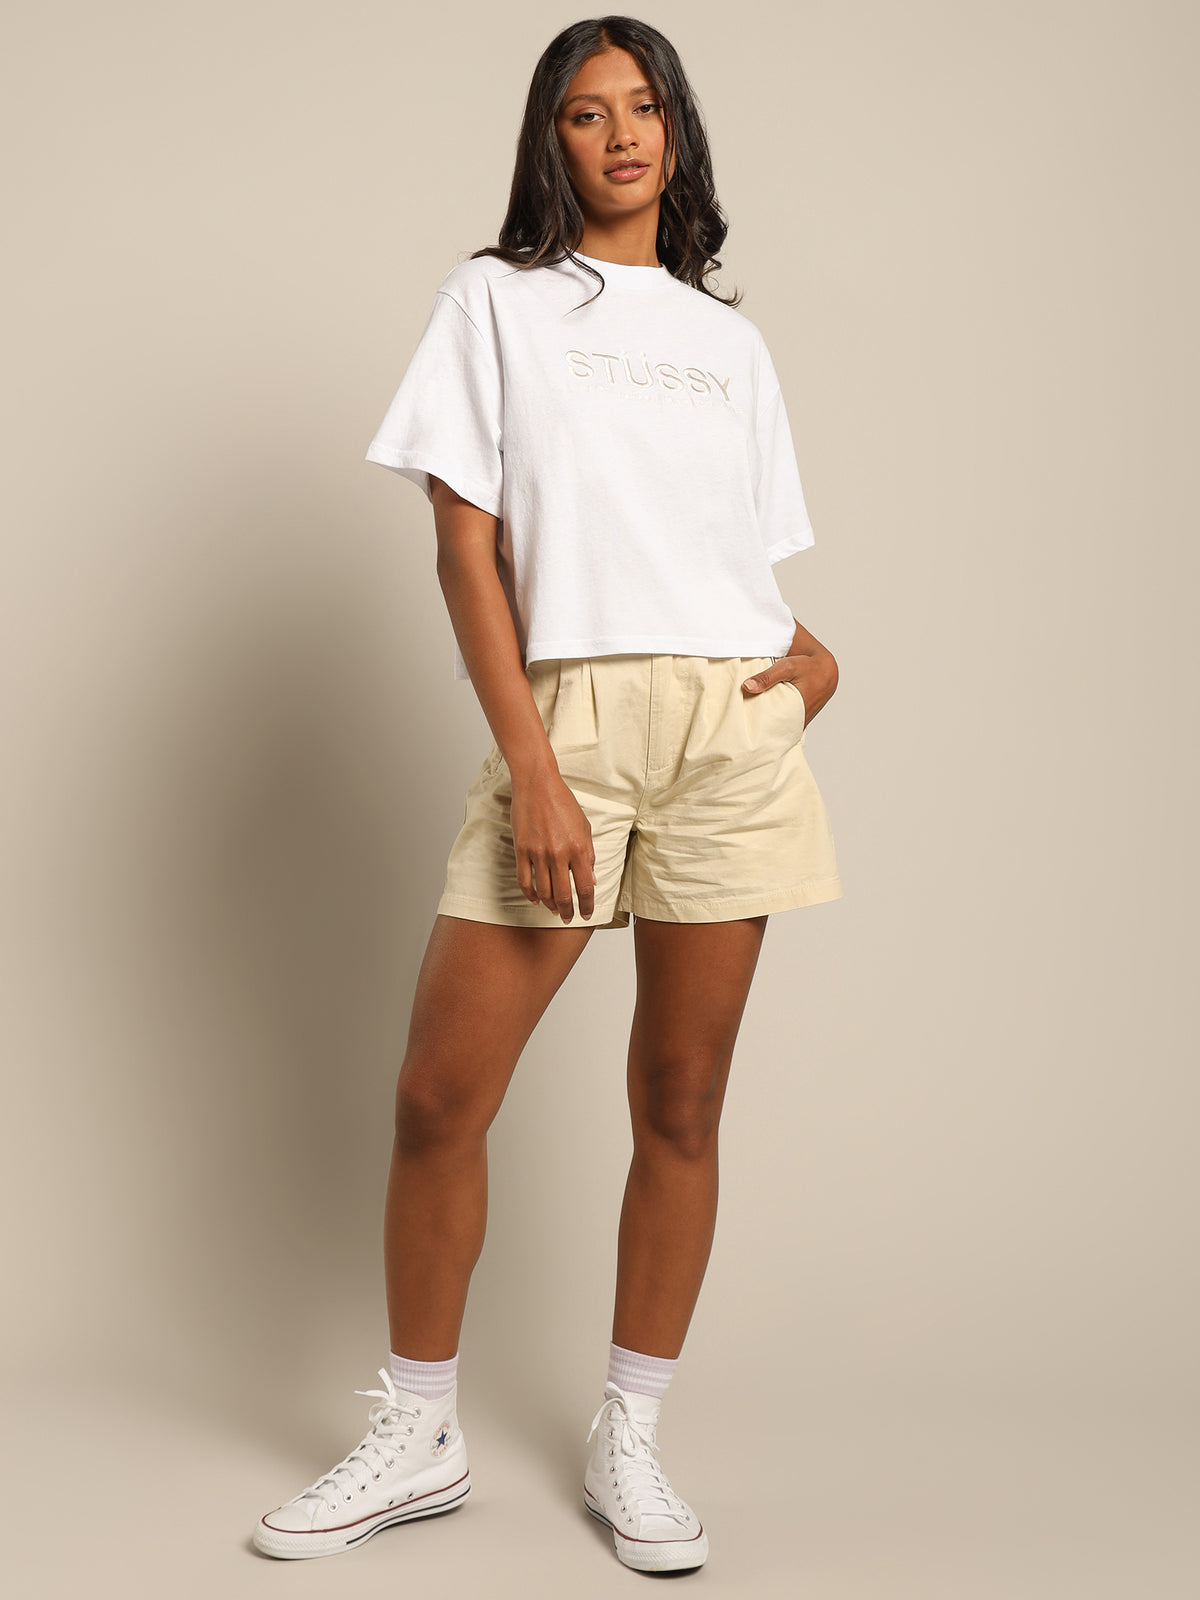 Trail Boxy T-Shirt in White